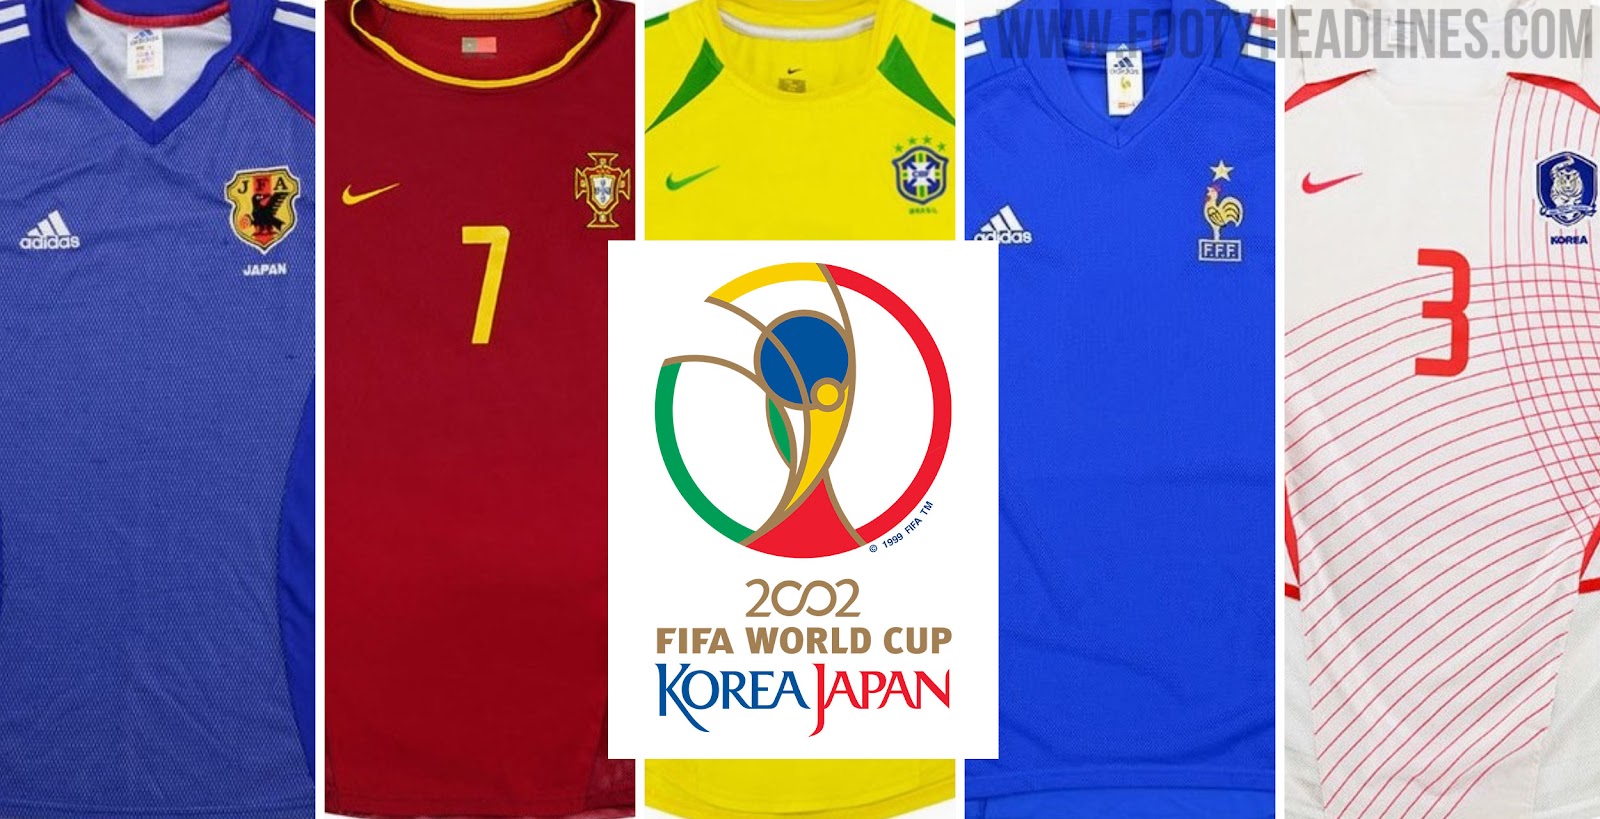 2002 World Cup Kit Overview - All 64 Kits - Footy Headlines